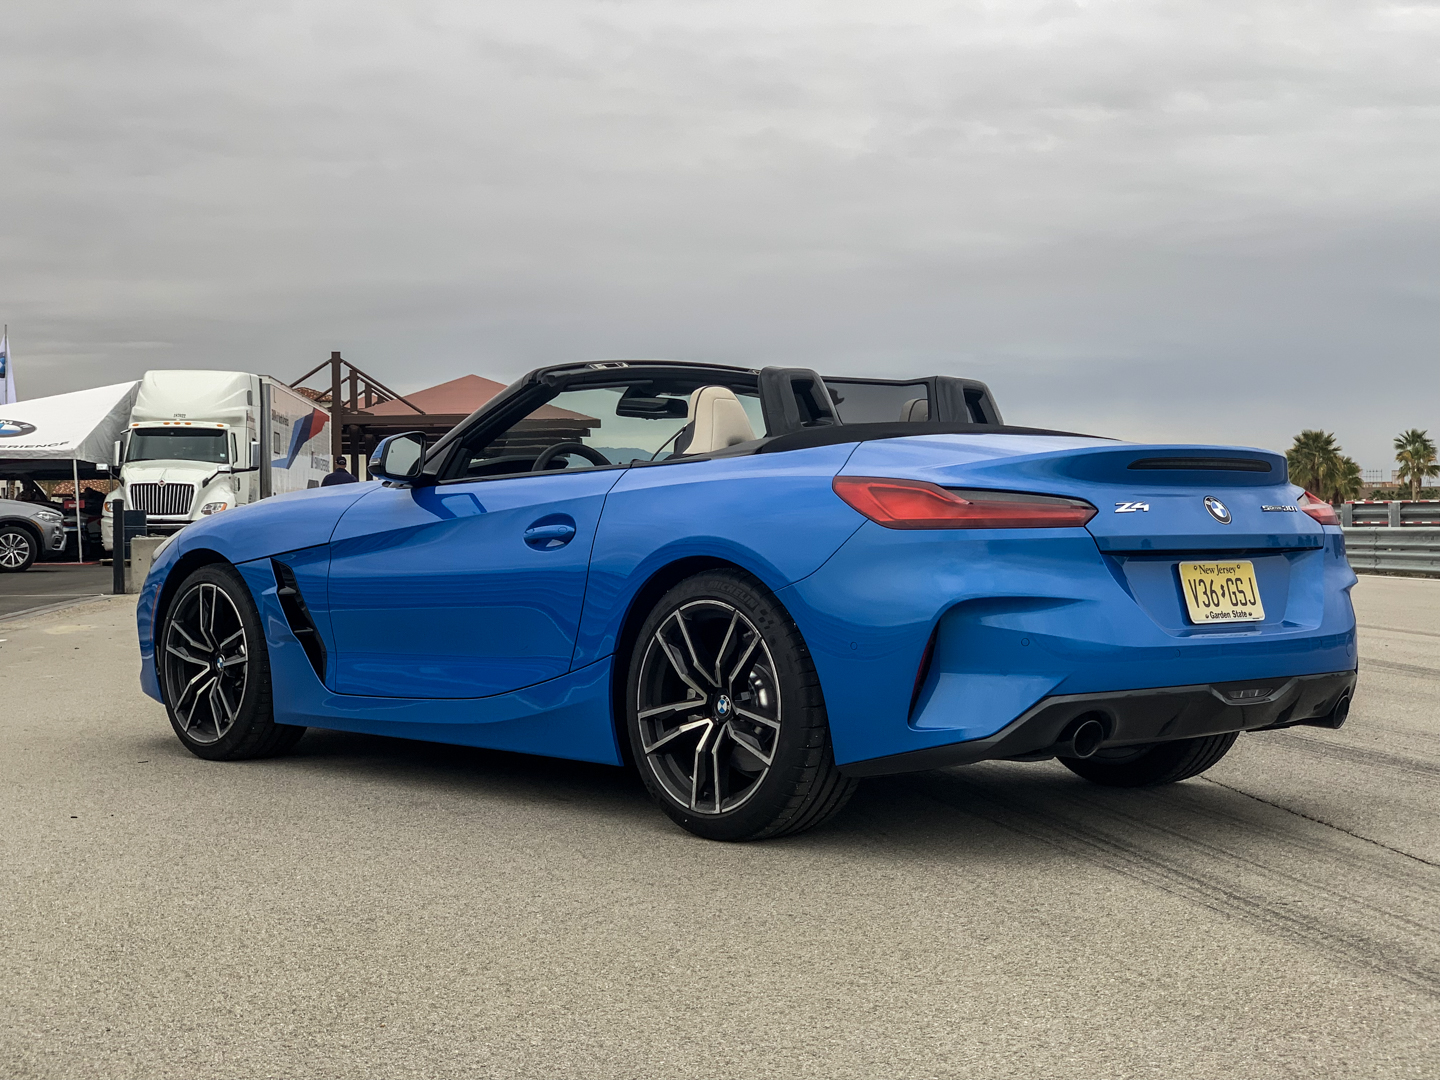 Simple ECU Chip brings BMW Z4 sDrive30i under 5 seconds to 60 mph